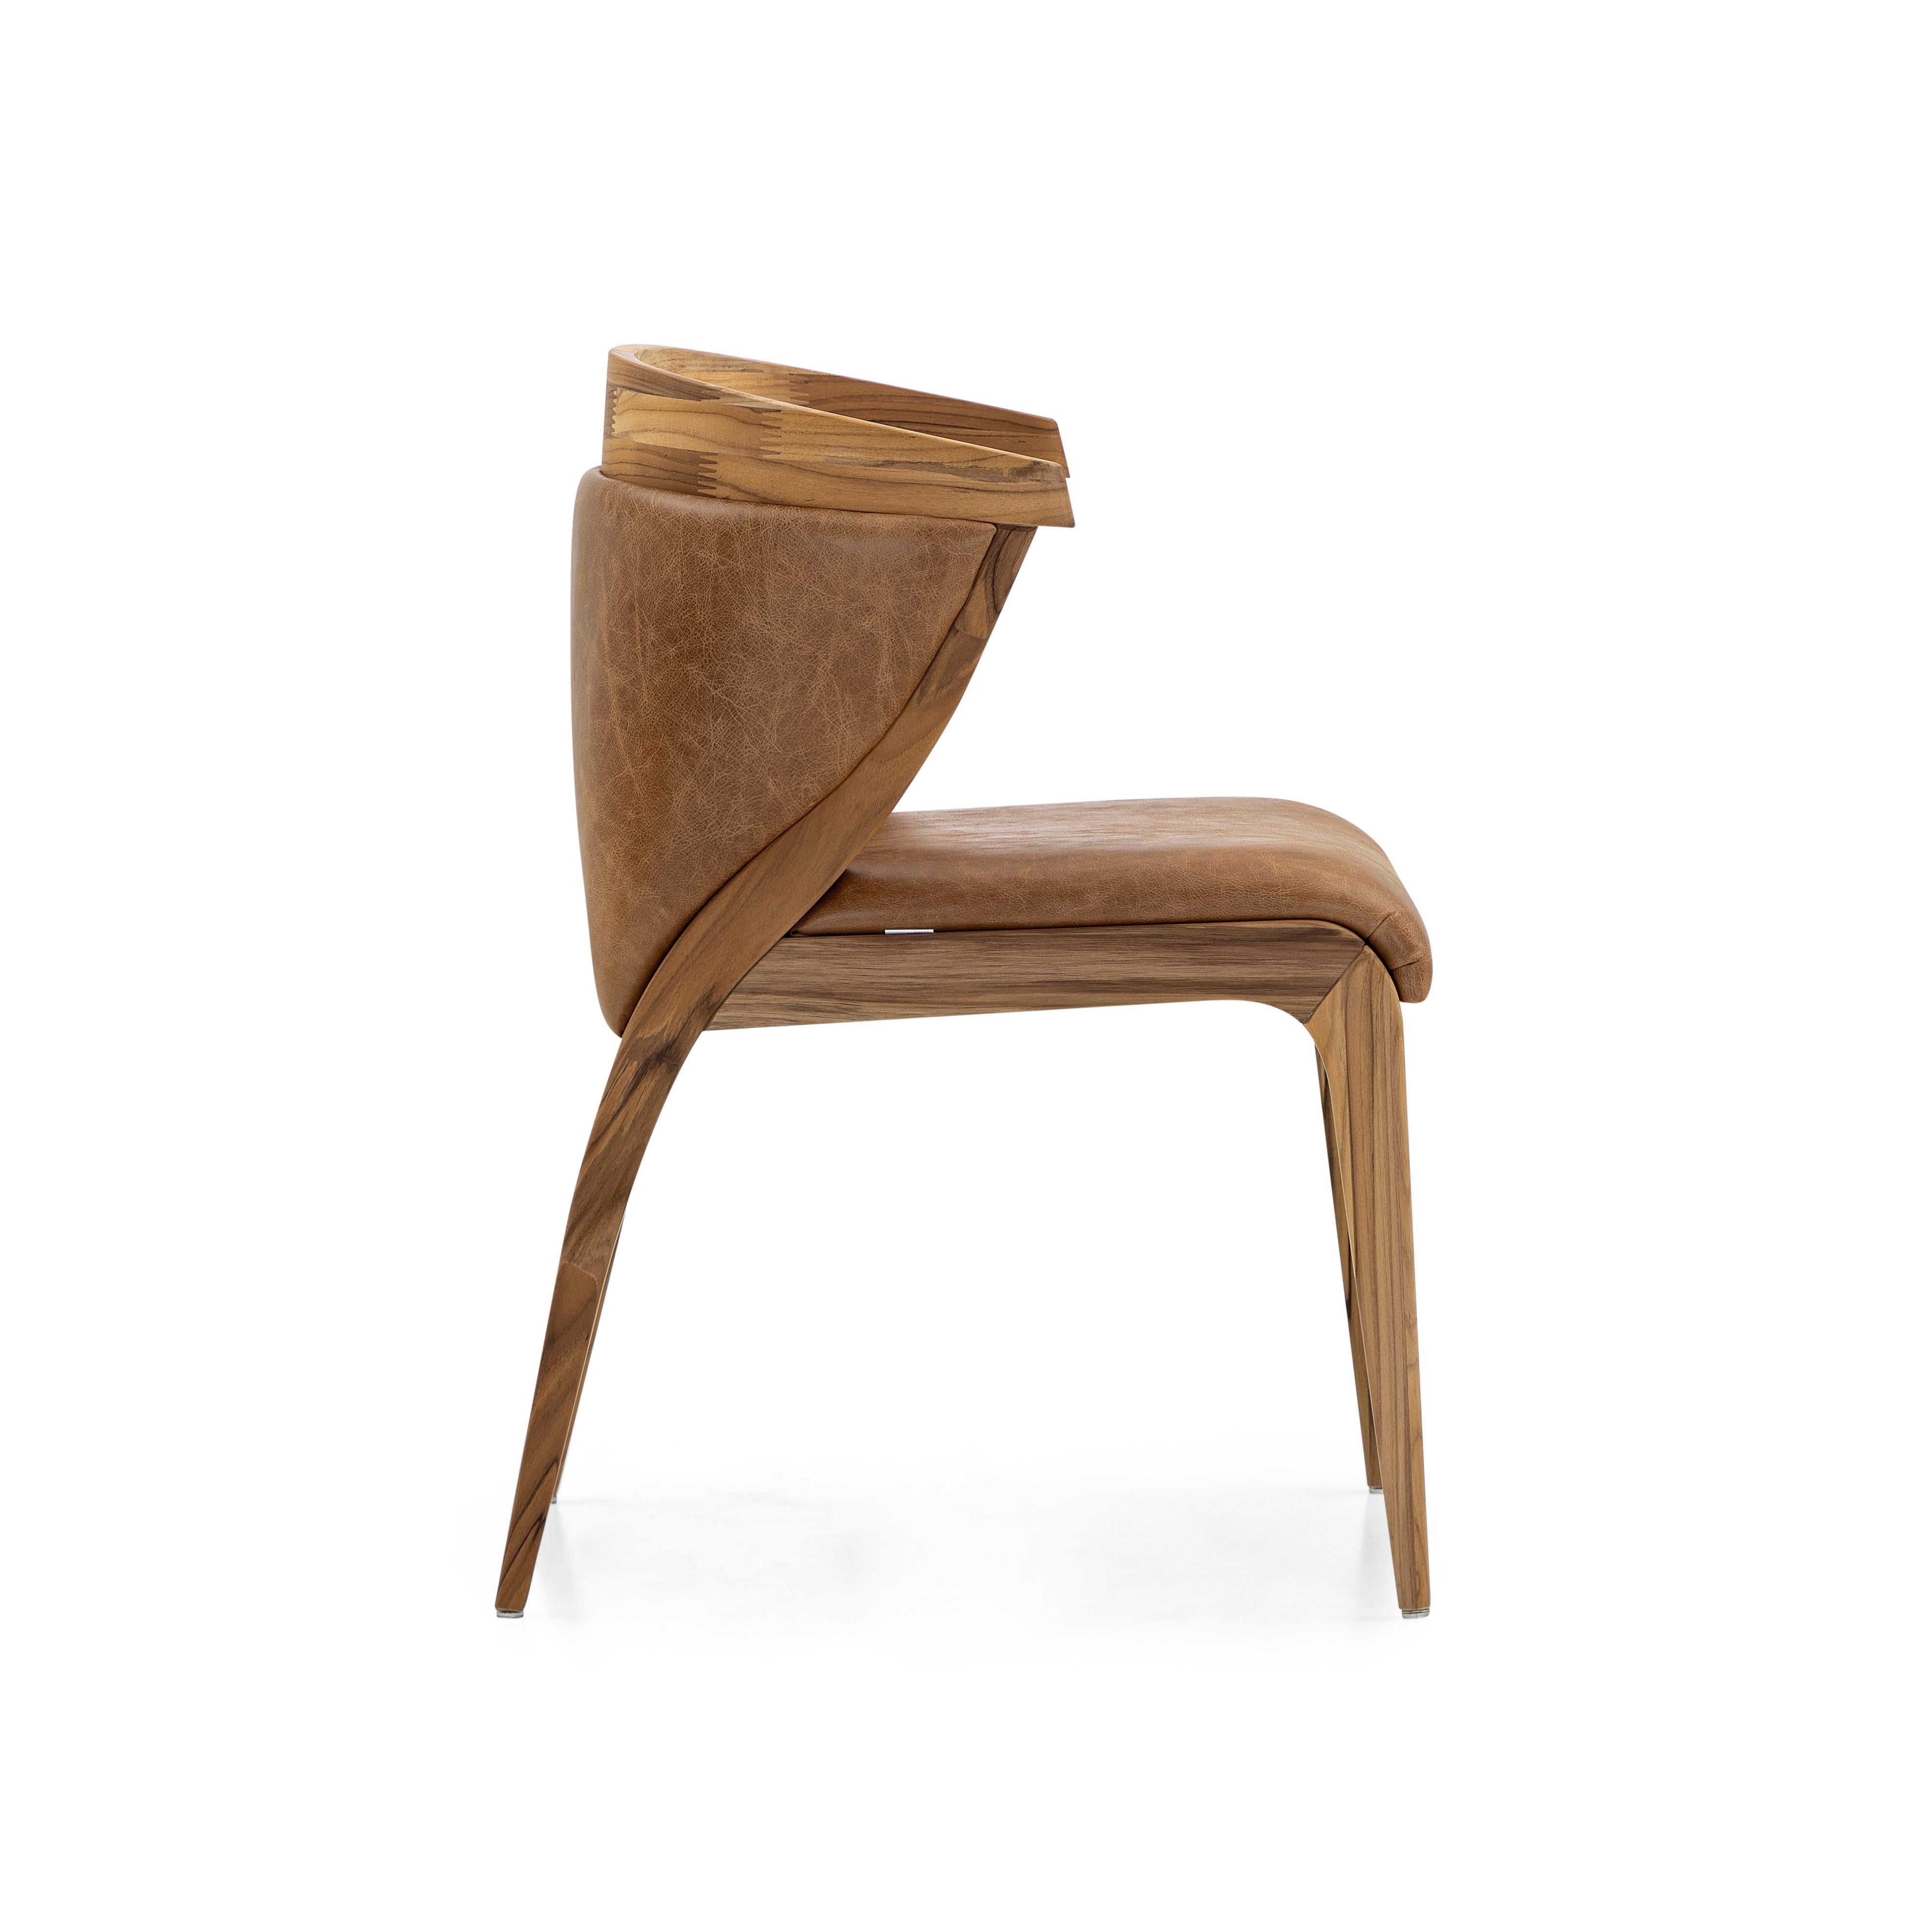 Our Uultis team has created the beautifully shaped Mat dining chair to decorate your beautiful dining table with an upholstered back and seat in brown leather and a teak wood finish. This chair has a beautiful simple but elegant design that it will